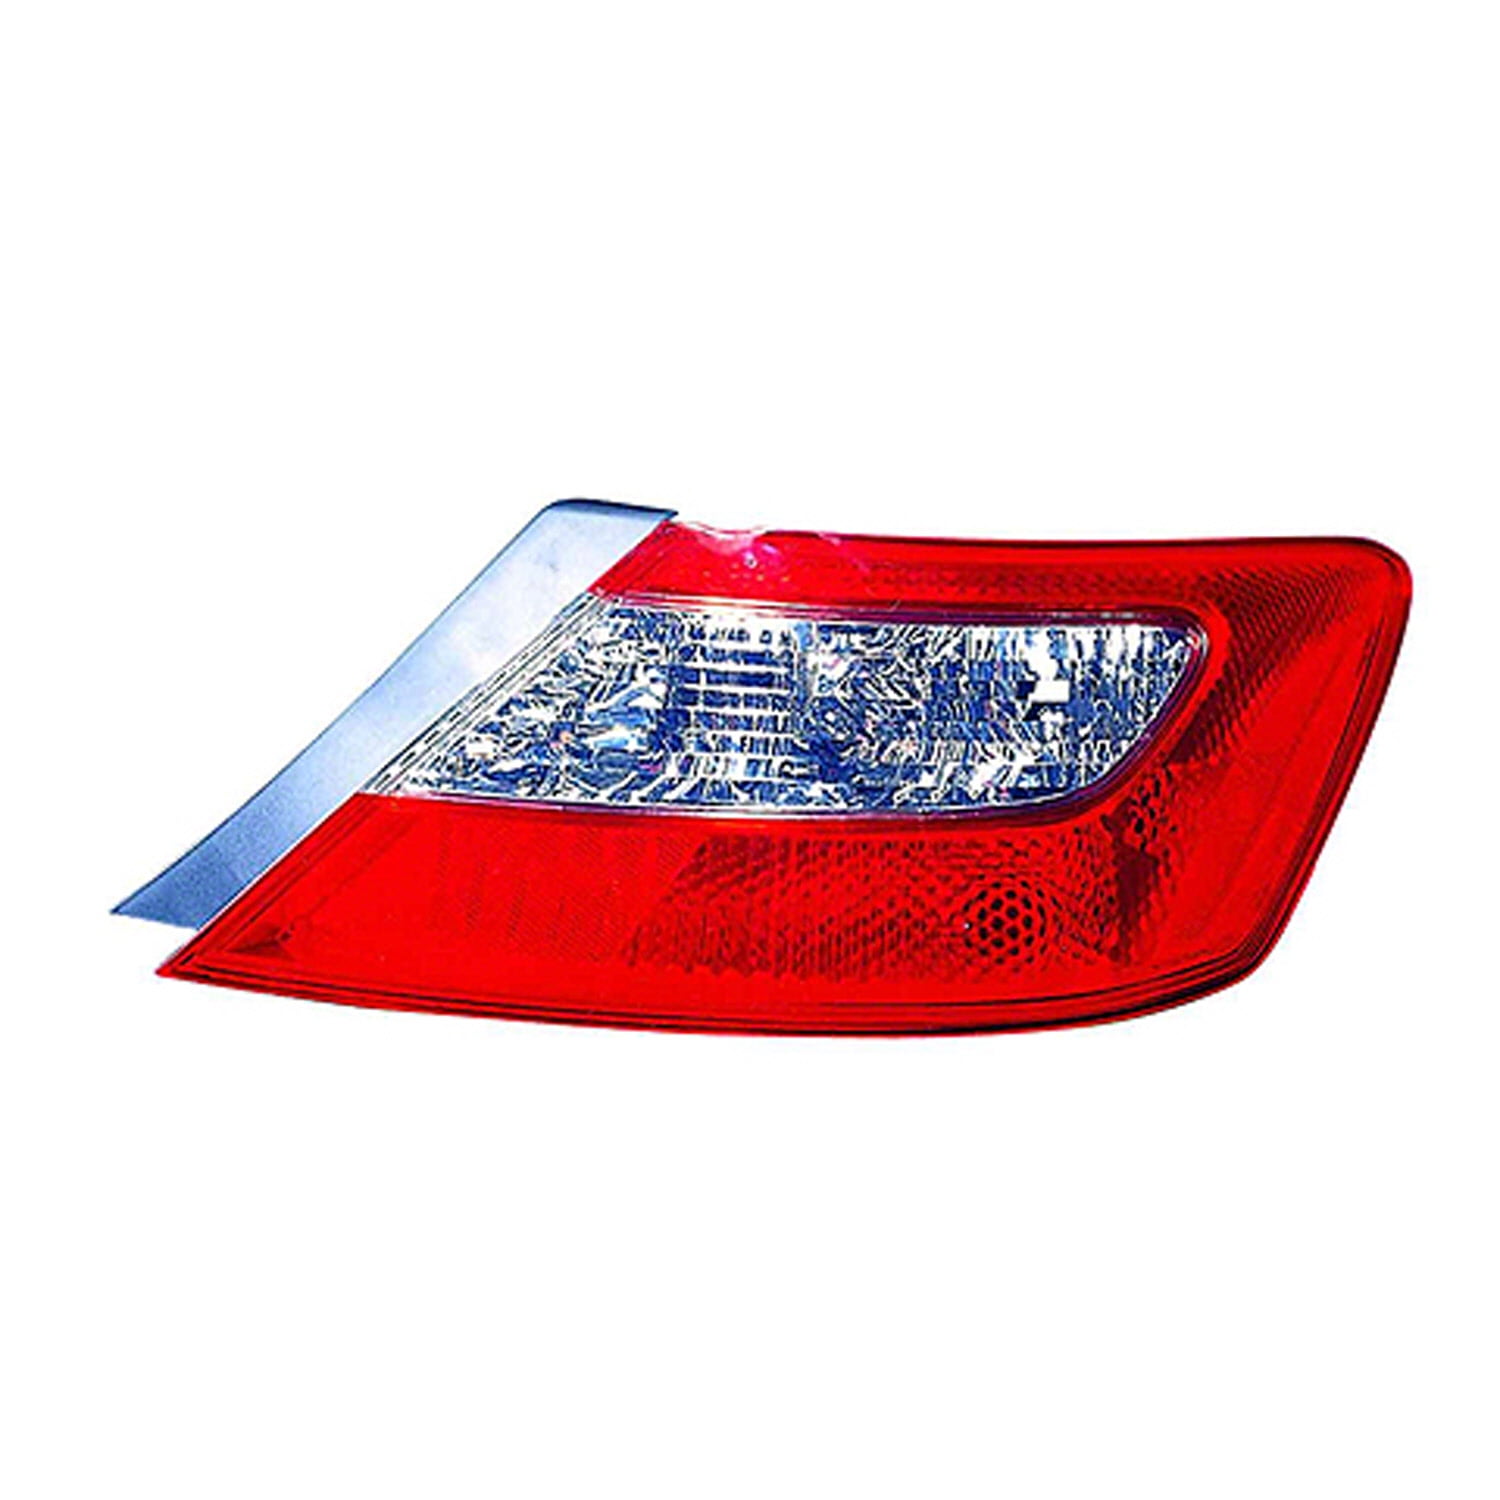 Aftermarket 2009-2011 Honda Civic DX Coupe 2-Door Aftermarket Passenger Side Rear Tail Lamp Lens 2009 Honda Civic Tail Light Cover Replacement